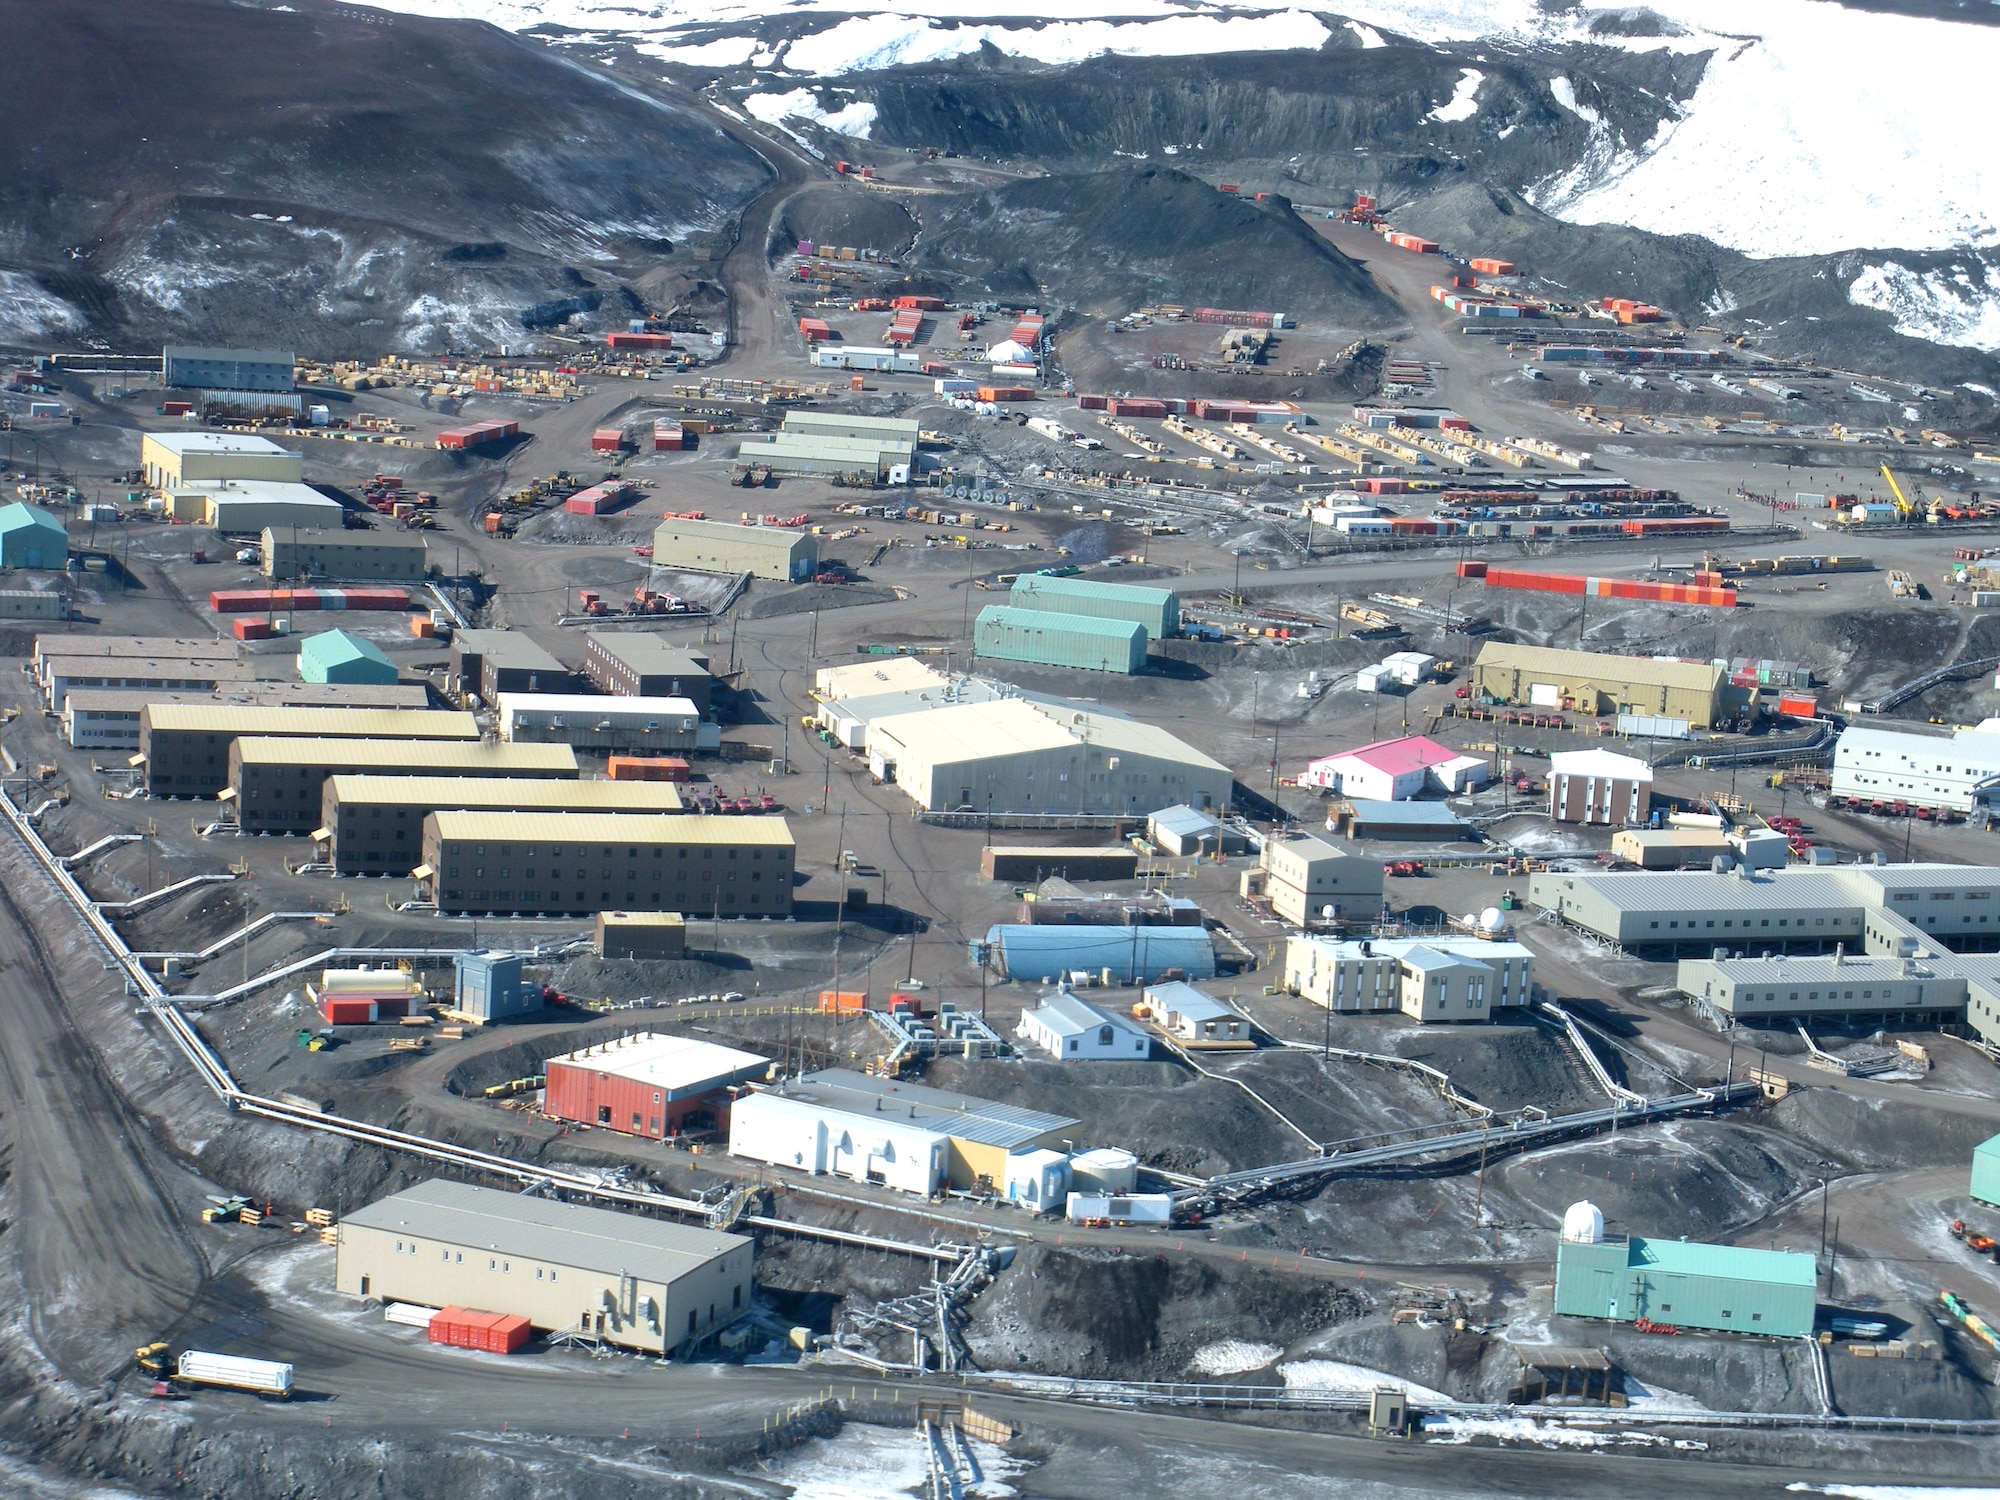 Members of the 18th Aeromedical Evacuation Squadron, Kadena Air Base, Japan, conducted medical evacuation missions over a three-month period at McMurdo Station, Antarctica. The Airmen provided medical care for a community of more than 1,650 scientists, researchers, support staff and security personnel.  (U.S. Air Force courtesy photo)
